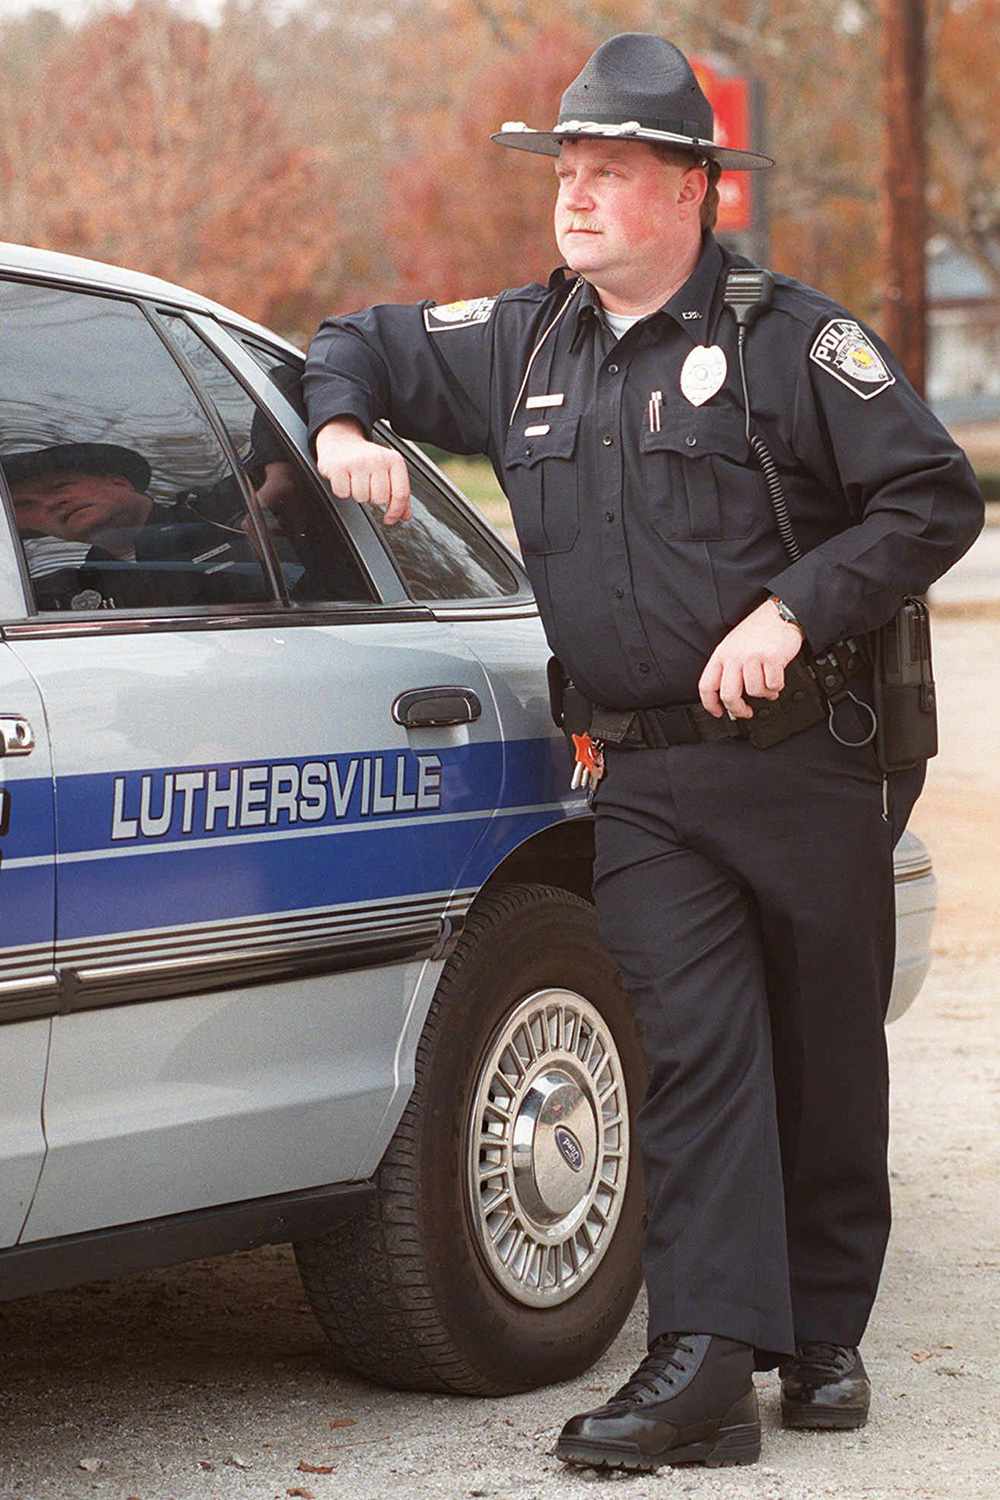 Richard Jewell, stands by one of the department's patrol cruisers in the small Georgia town of Luthersville, Ga., on . Jewell, a former suspect in the Olympic Park bombing, joined the five-man force on Tuesday